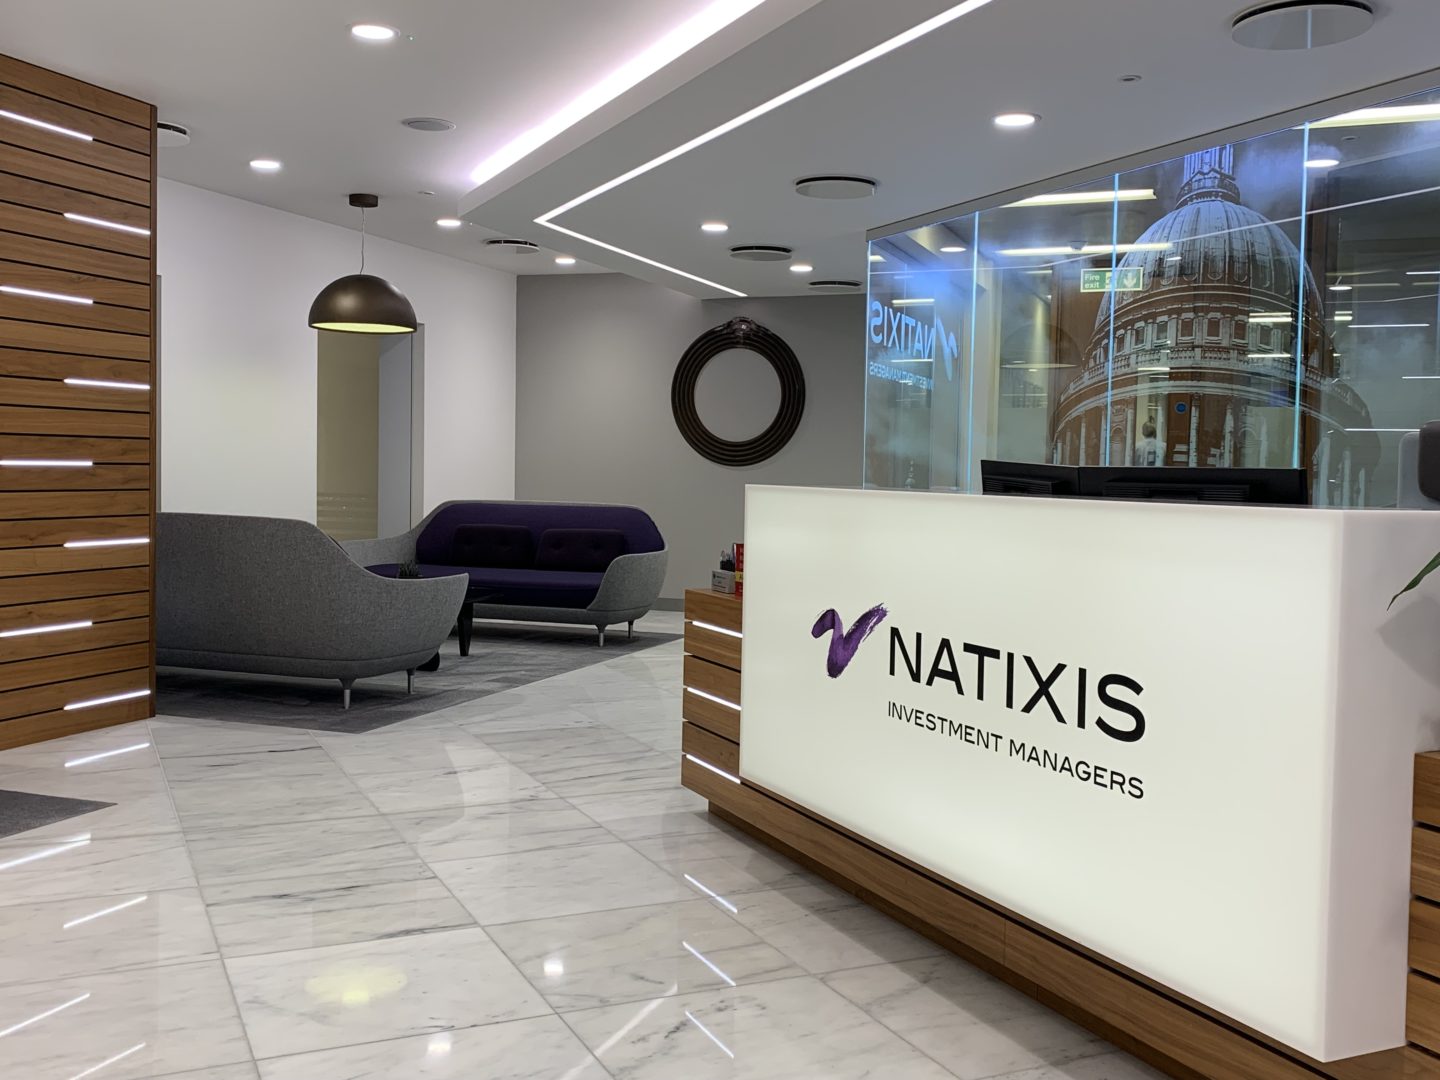 What does Natixis bring to the table?